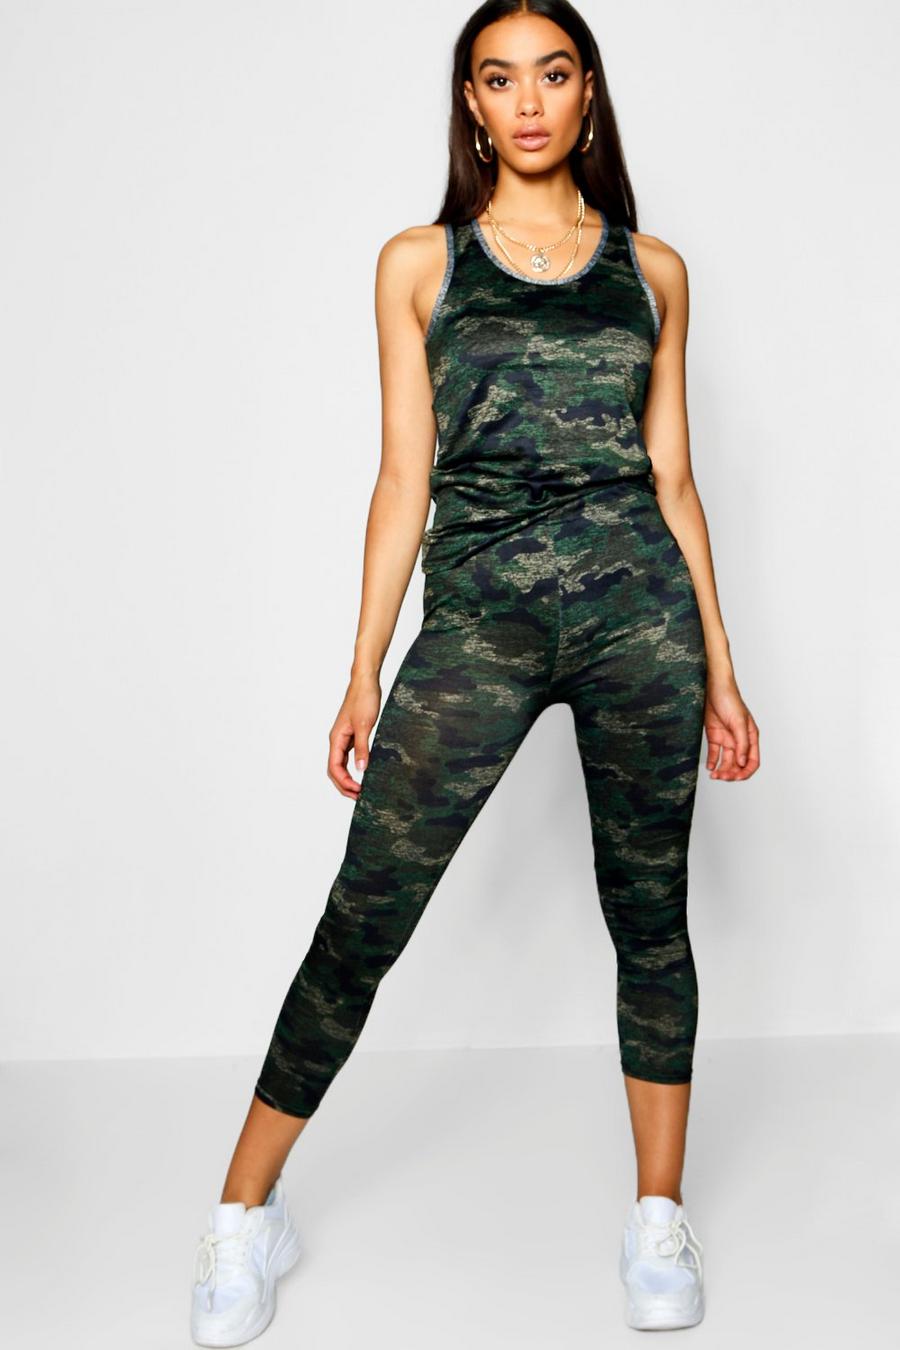 Green Camo Print Sports Vest Top And Leggings image number 1